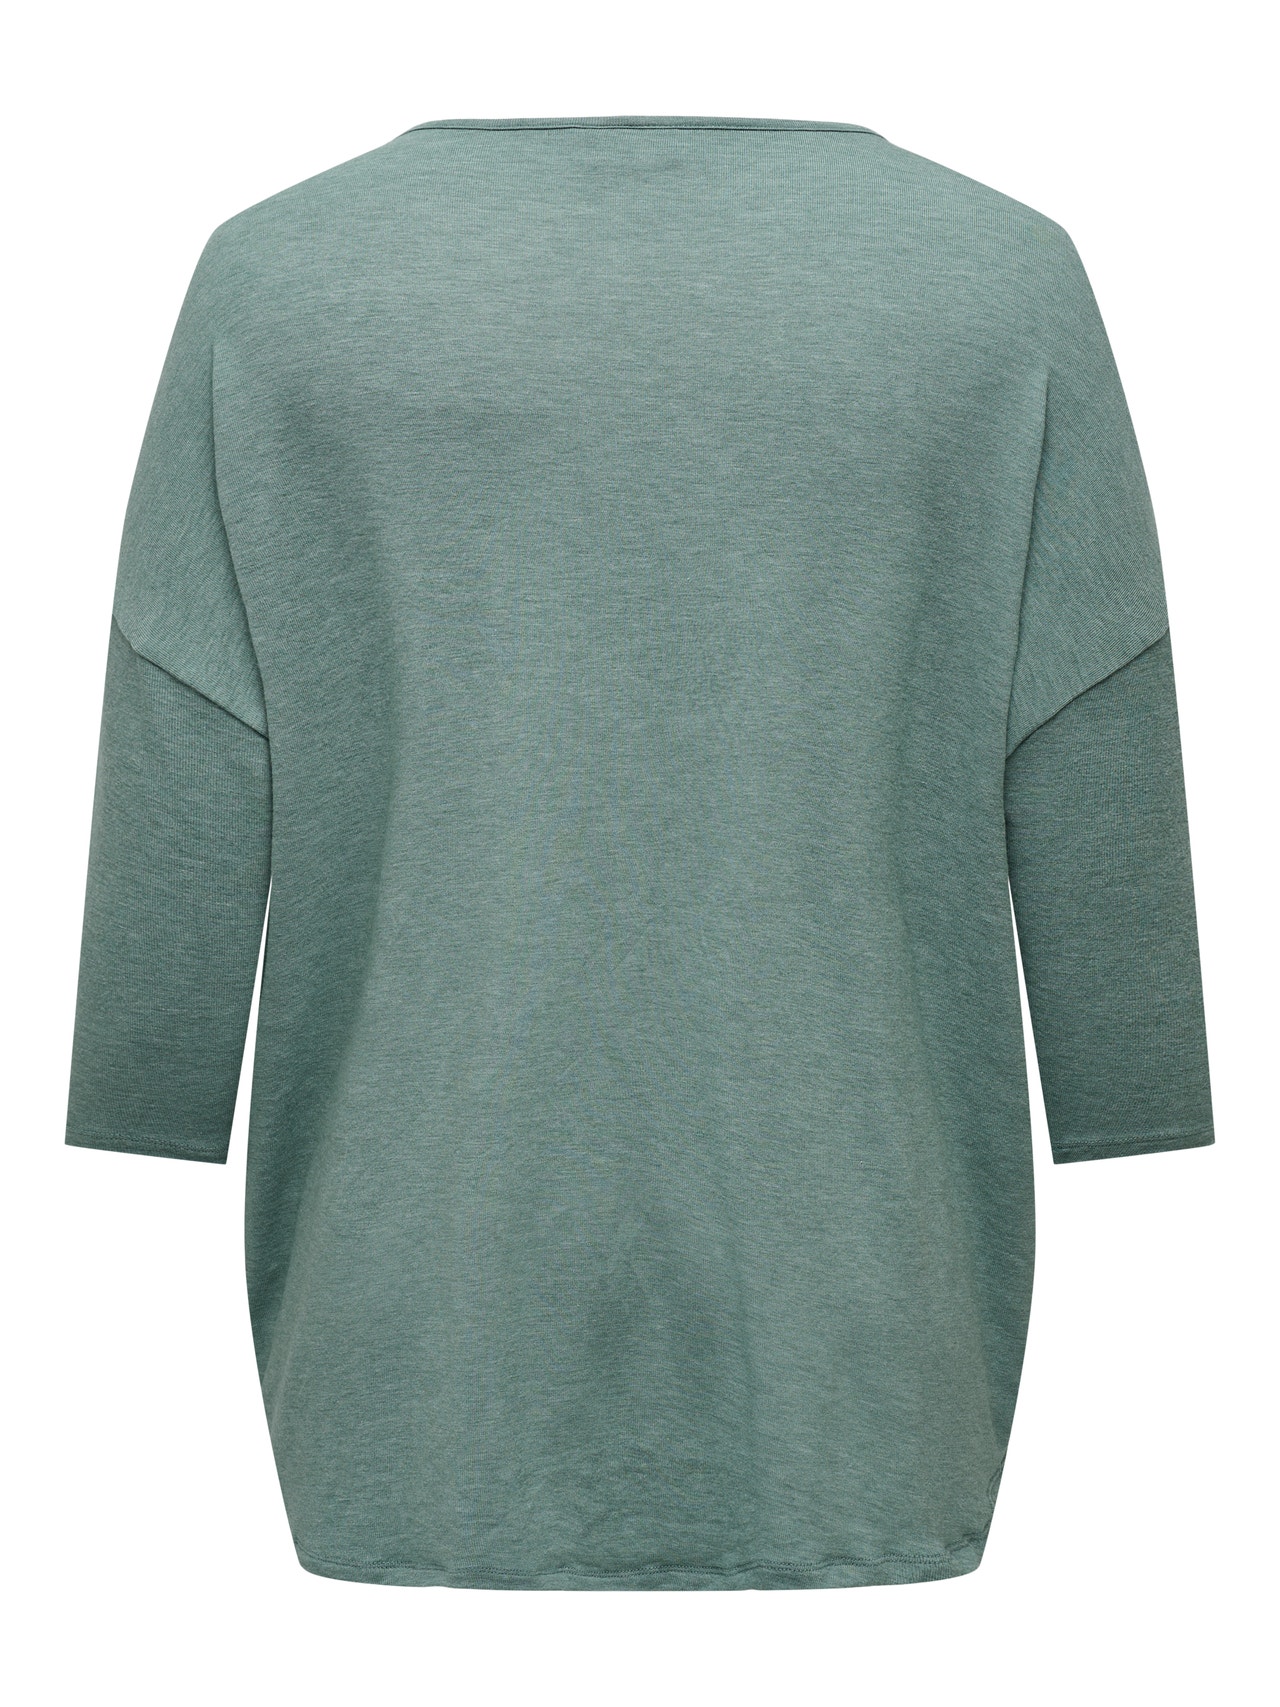 ONLY Curvy top med 3/4-ærmer -Chinois Green - 15229806